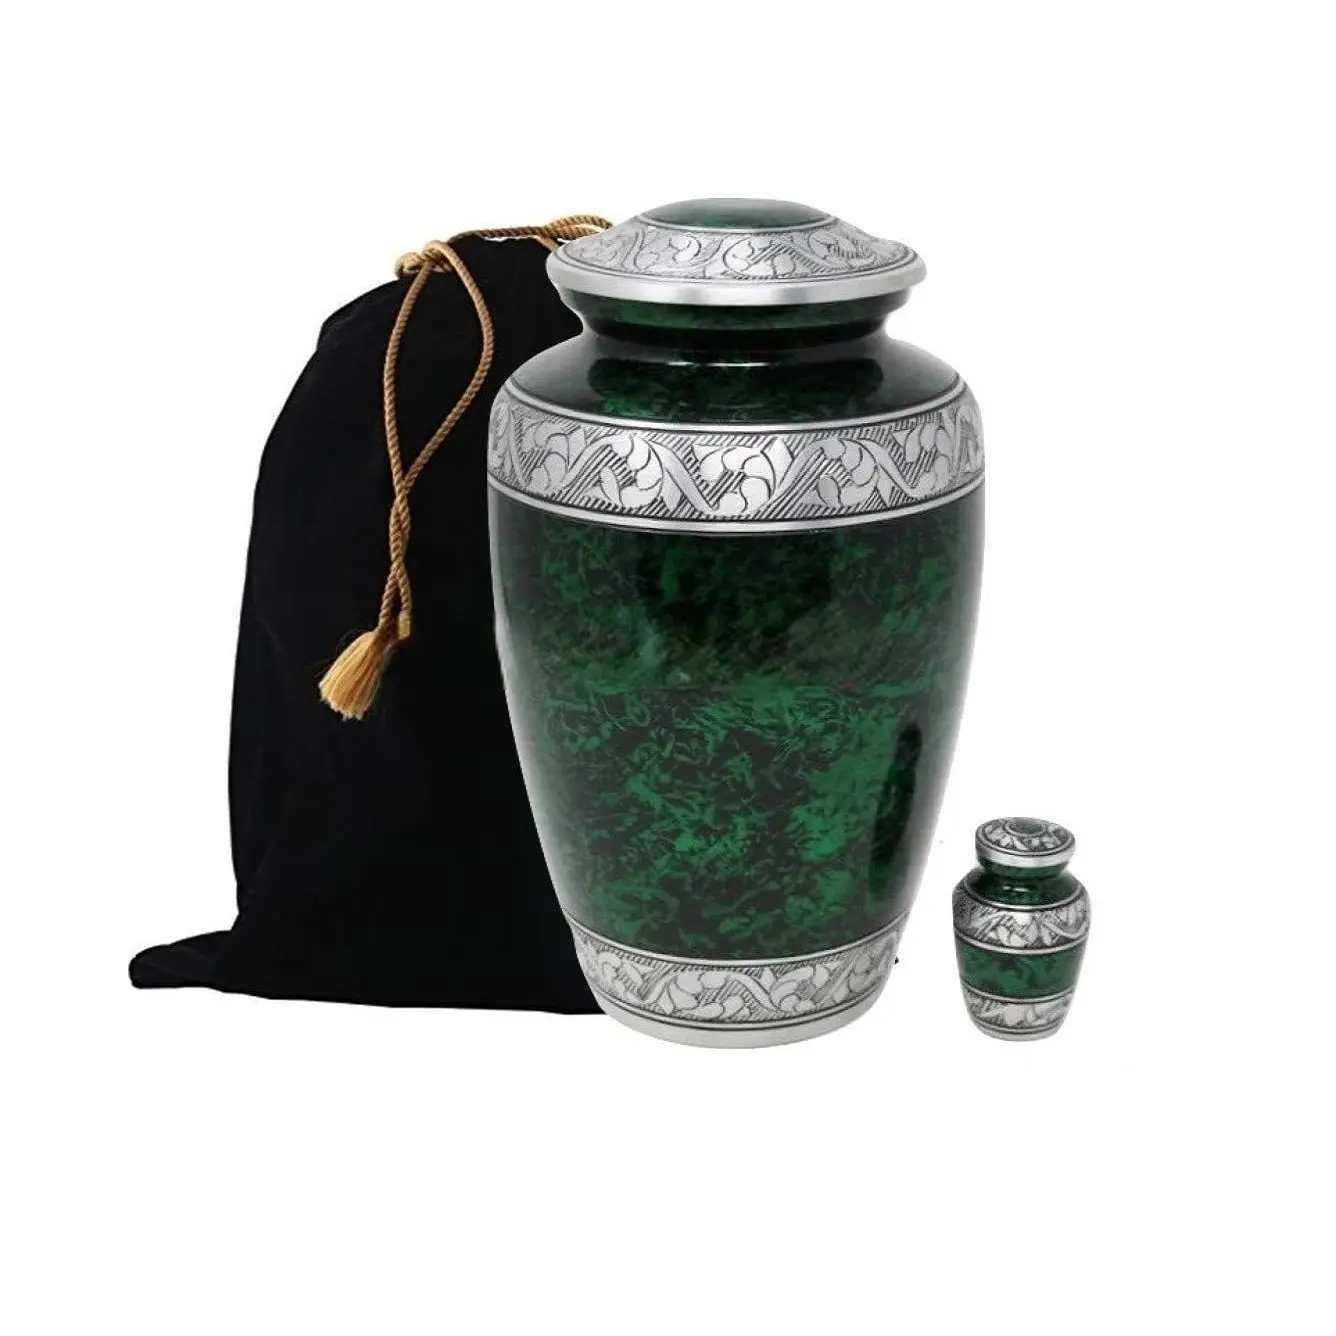 Handmade Adult Ashes Storage Urn Memorial Metal Engraved Cremation Urn Funeral Burial Urn Pot Buy From Indian Supplier